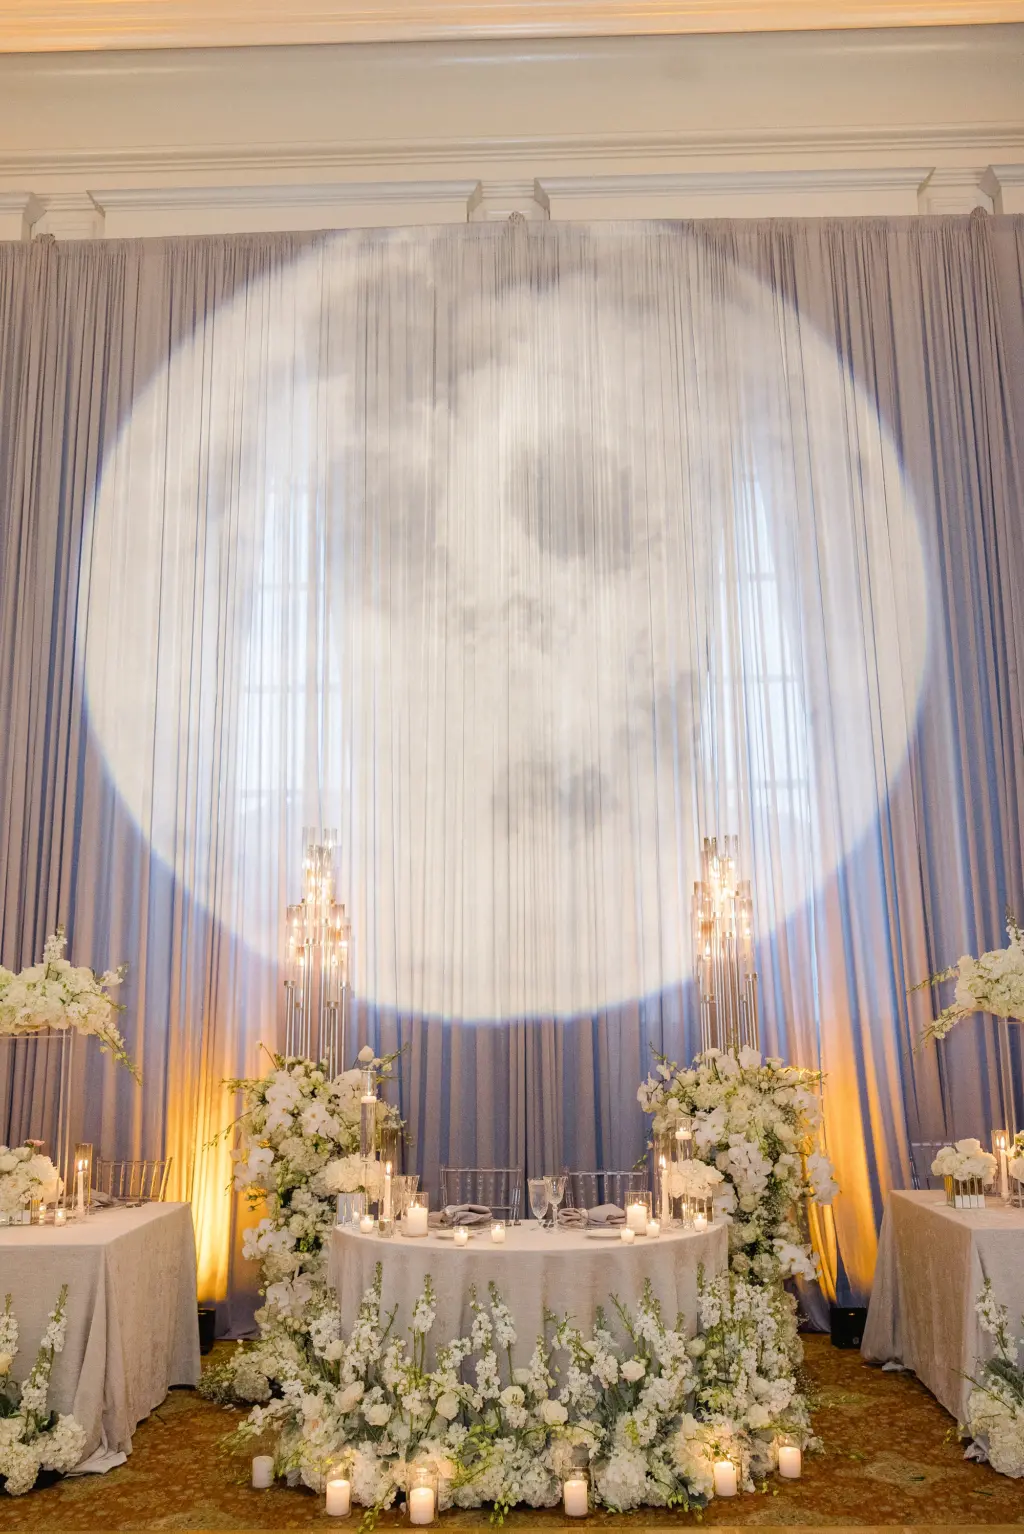 Moon Image for Projector GOBO | Silver, Blue and White Starry Night Winter Wonderland Wedding Reception Sweetheart Table Decor Inspiration | Tampa Bay Lighting and DJ Grant Hemond & Associates